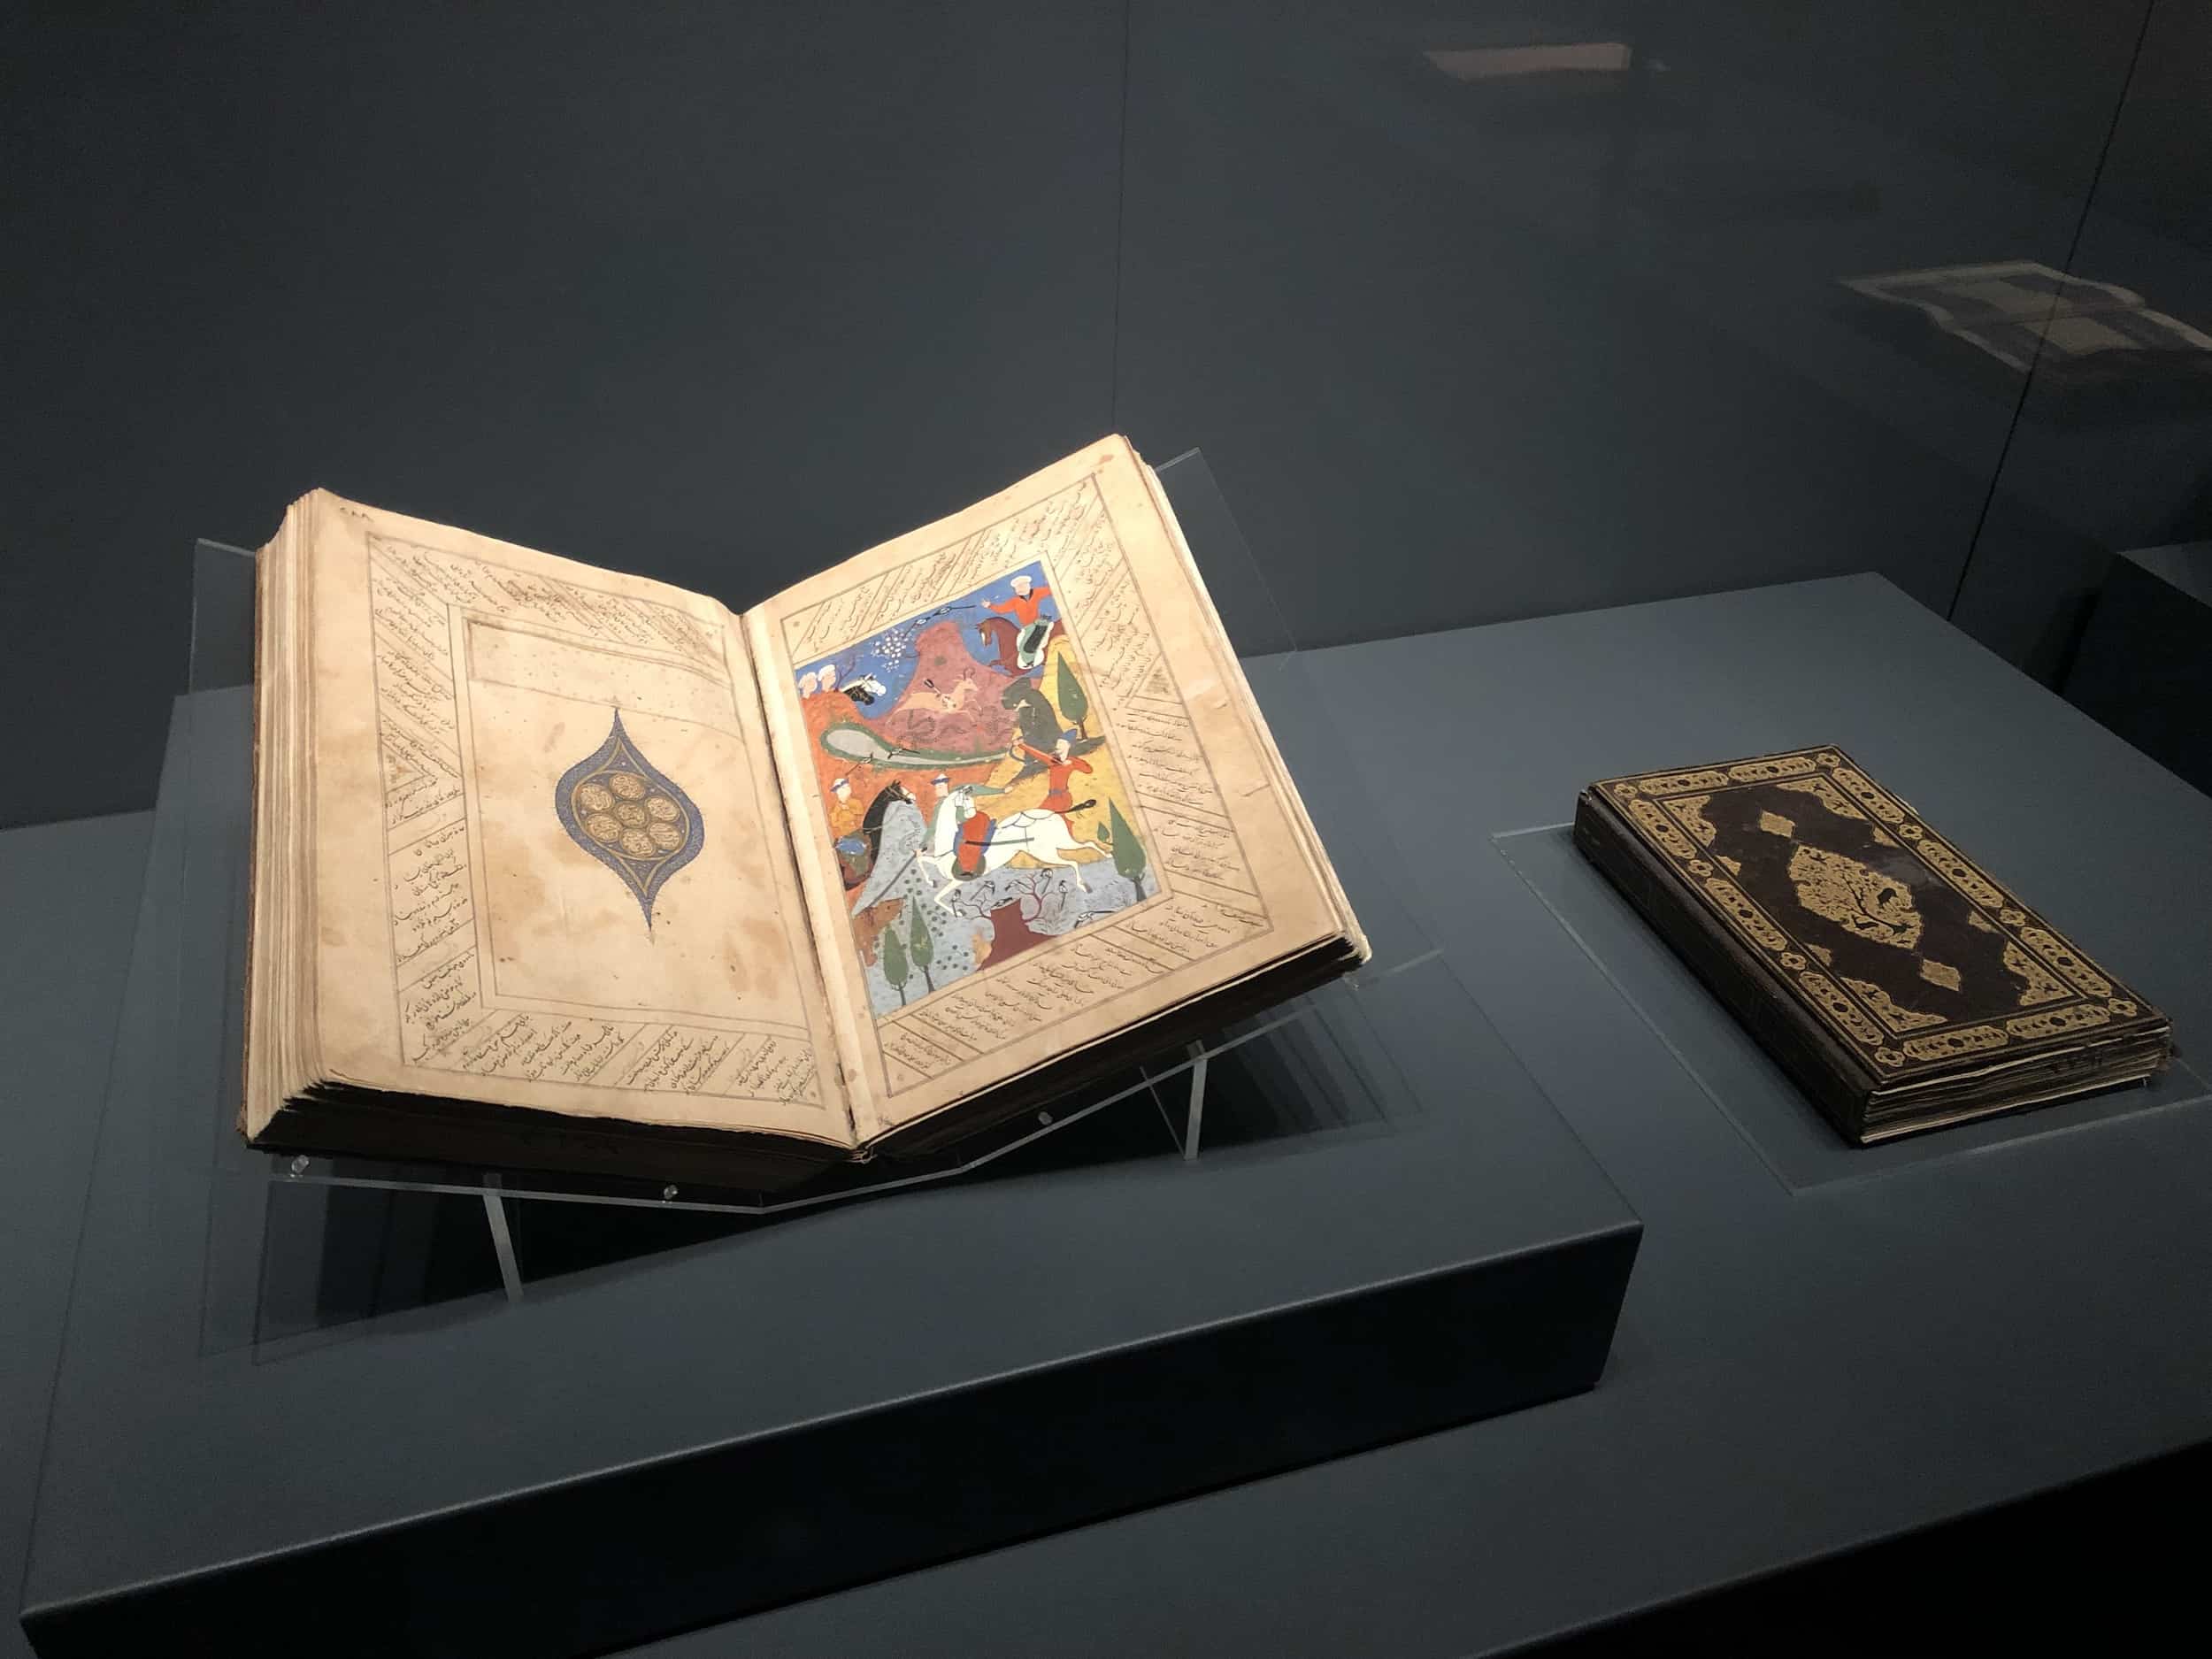 Quran from the Timurid period